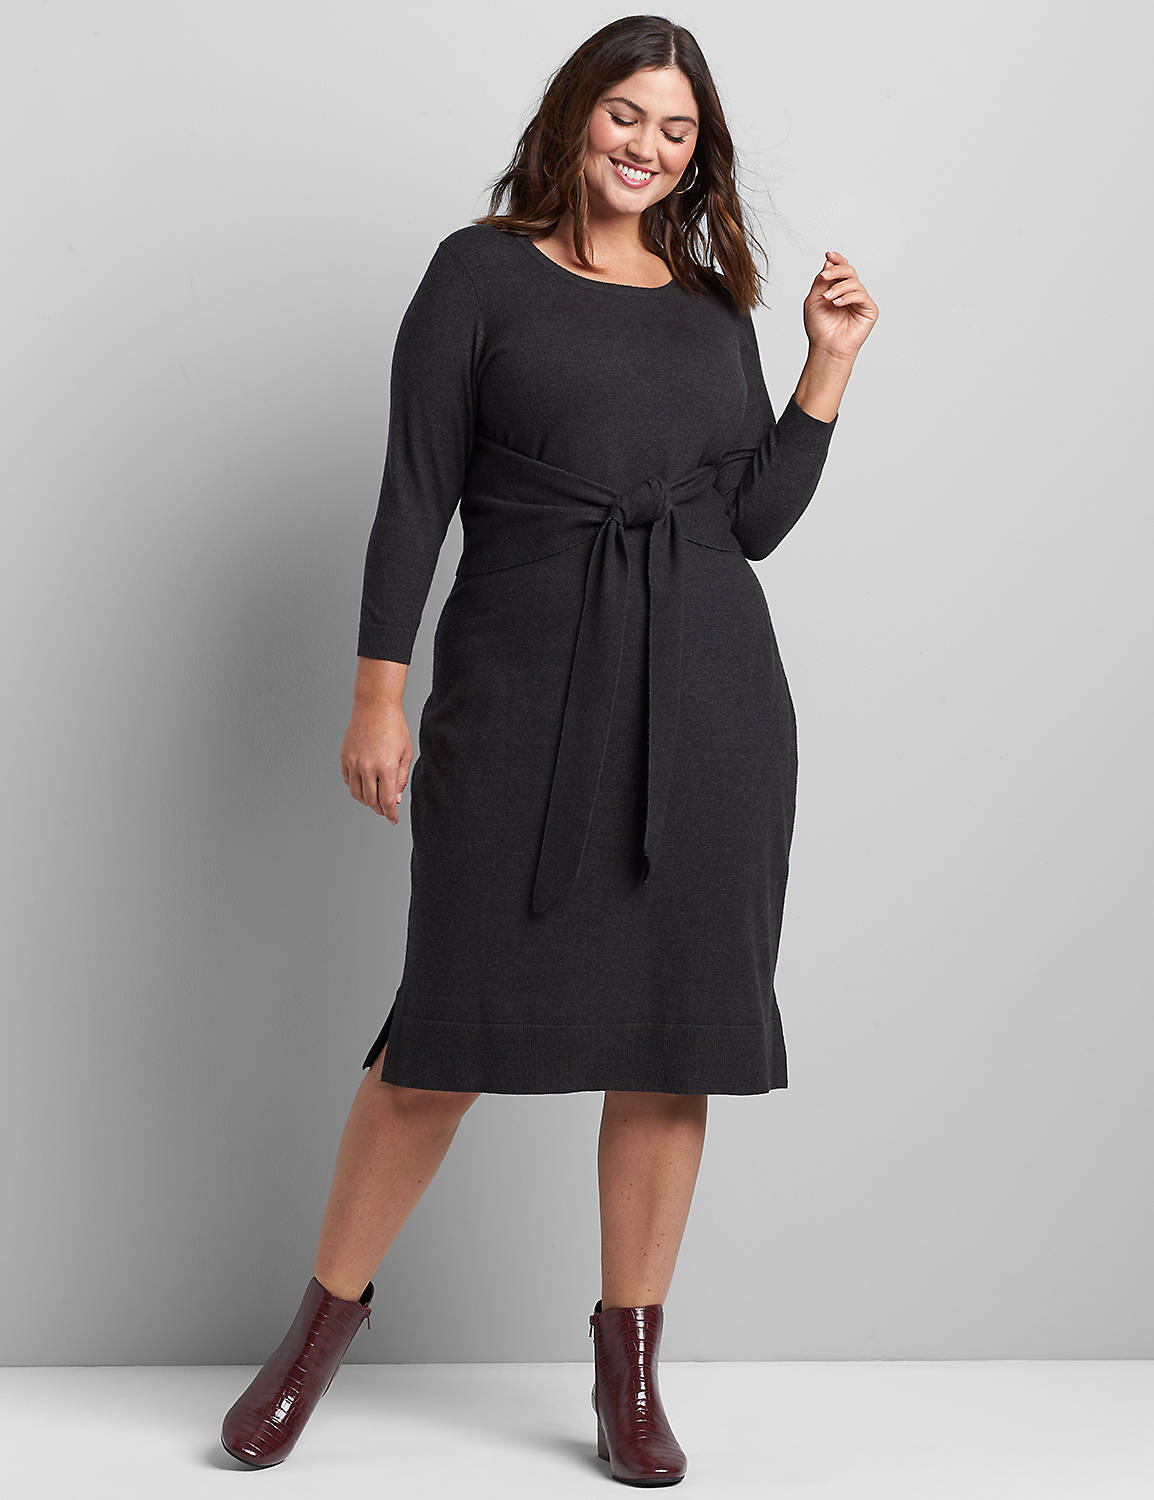 1115871 3/4 Sleeve Crew Neck Short Tie Front Sweater Dress:Charcoal Grey:14/16 Product Image 1